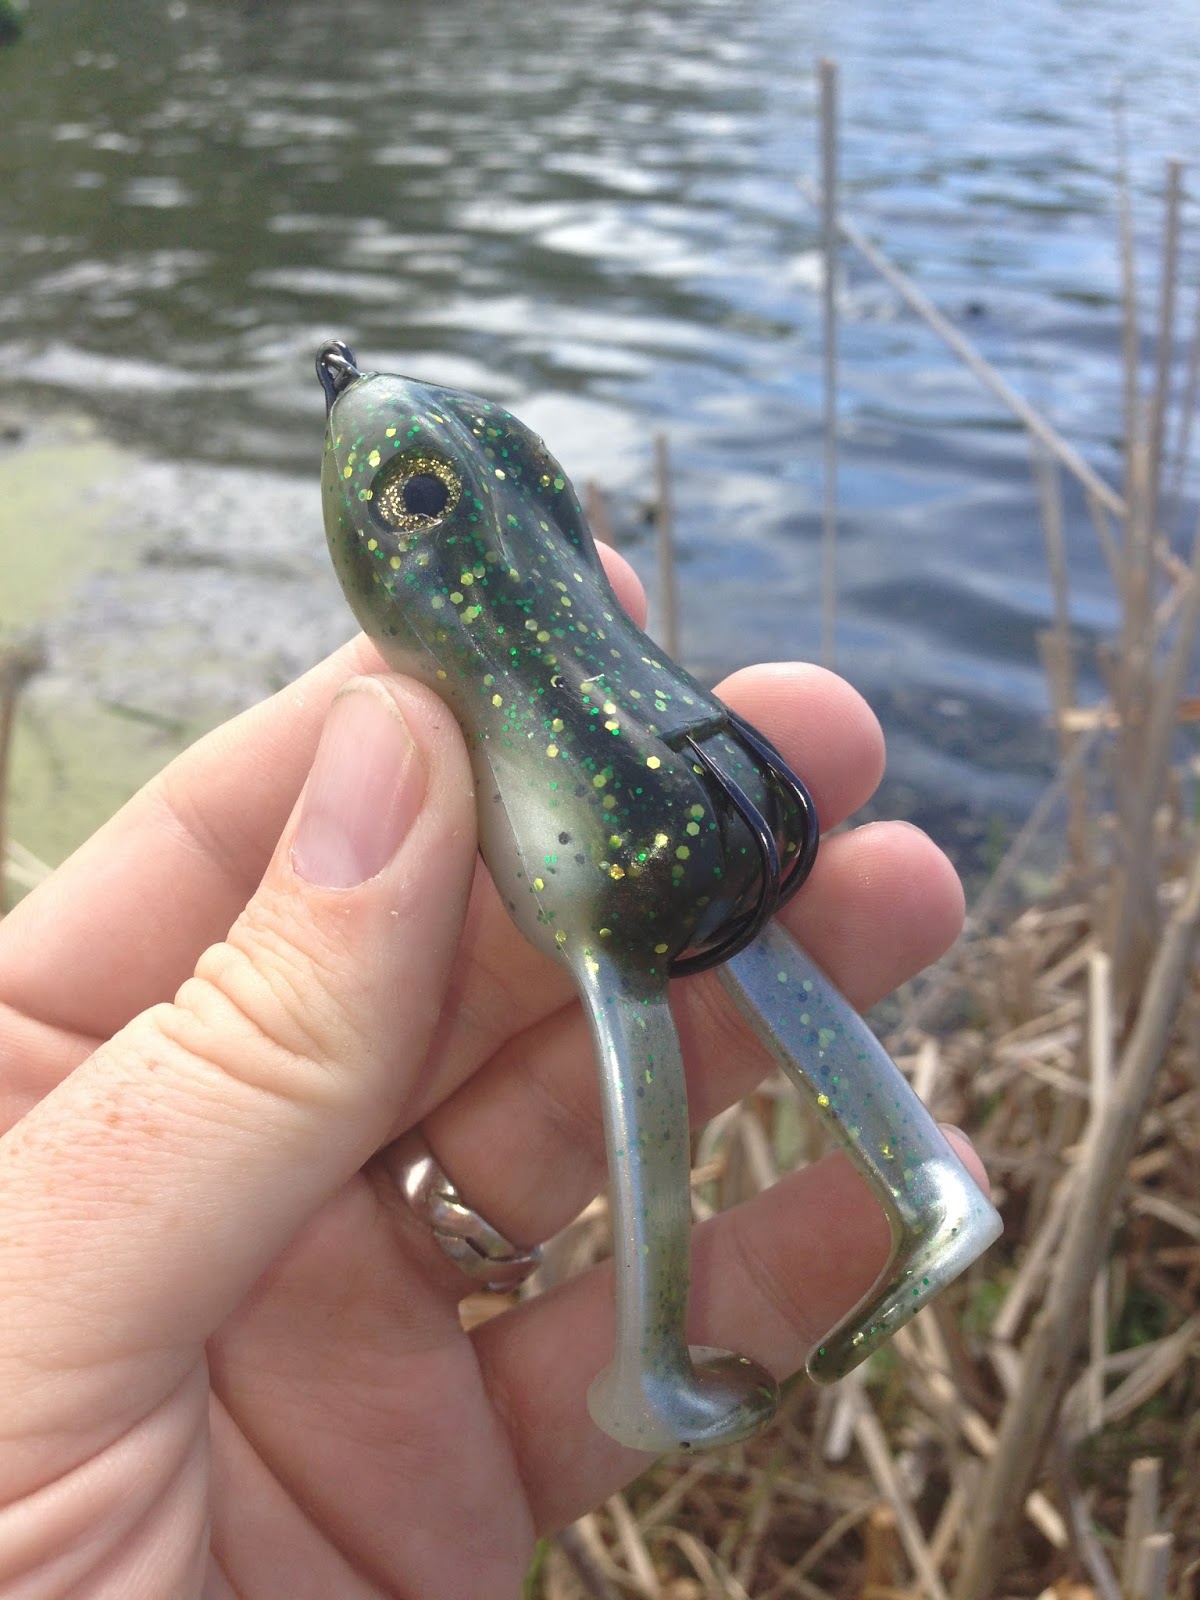 Bass Junkies Frog Pond: Stanley Ribbit Top Toad Review